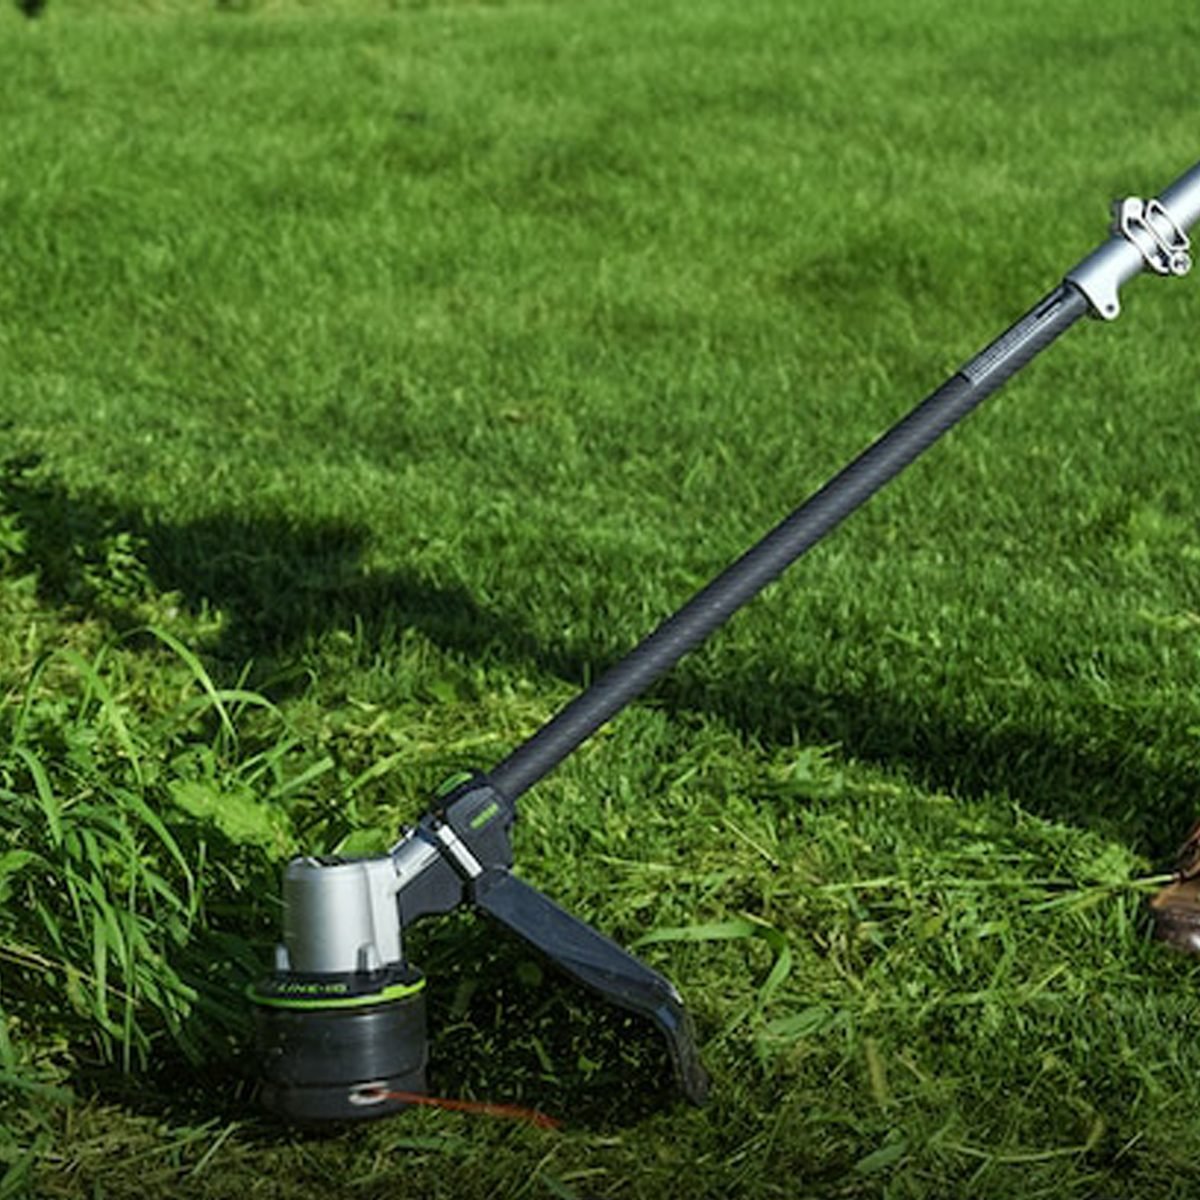 Ego Power+ 15 Inch String Trimmer Ecomm Lowes.com